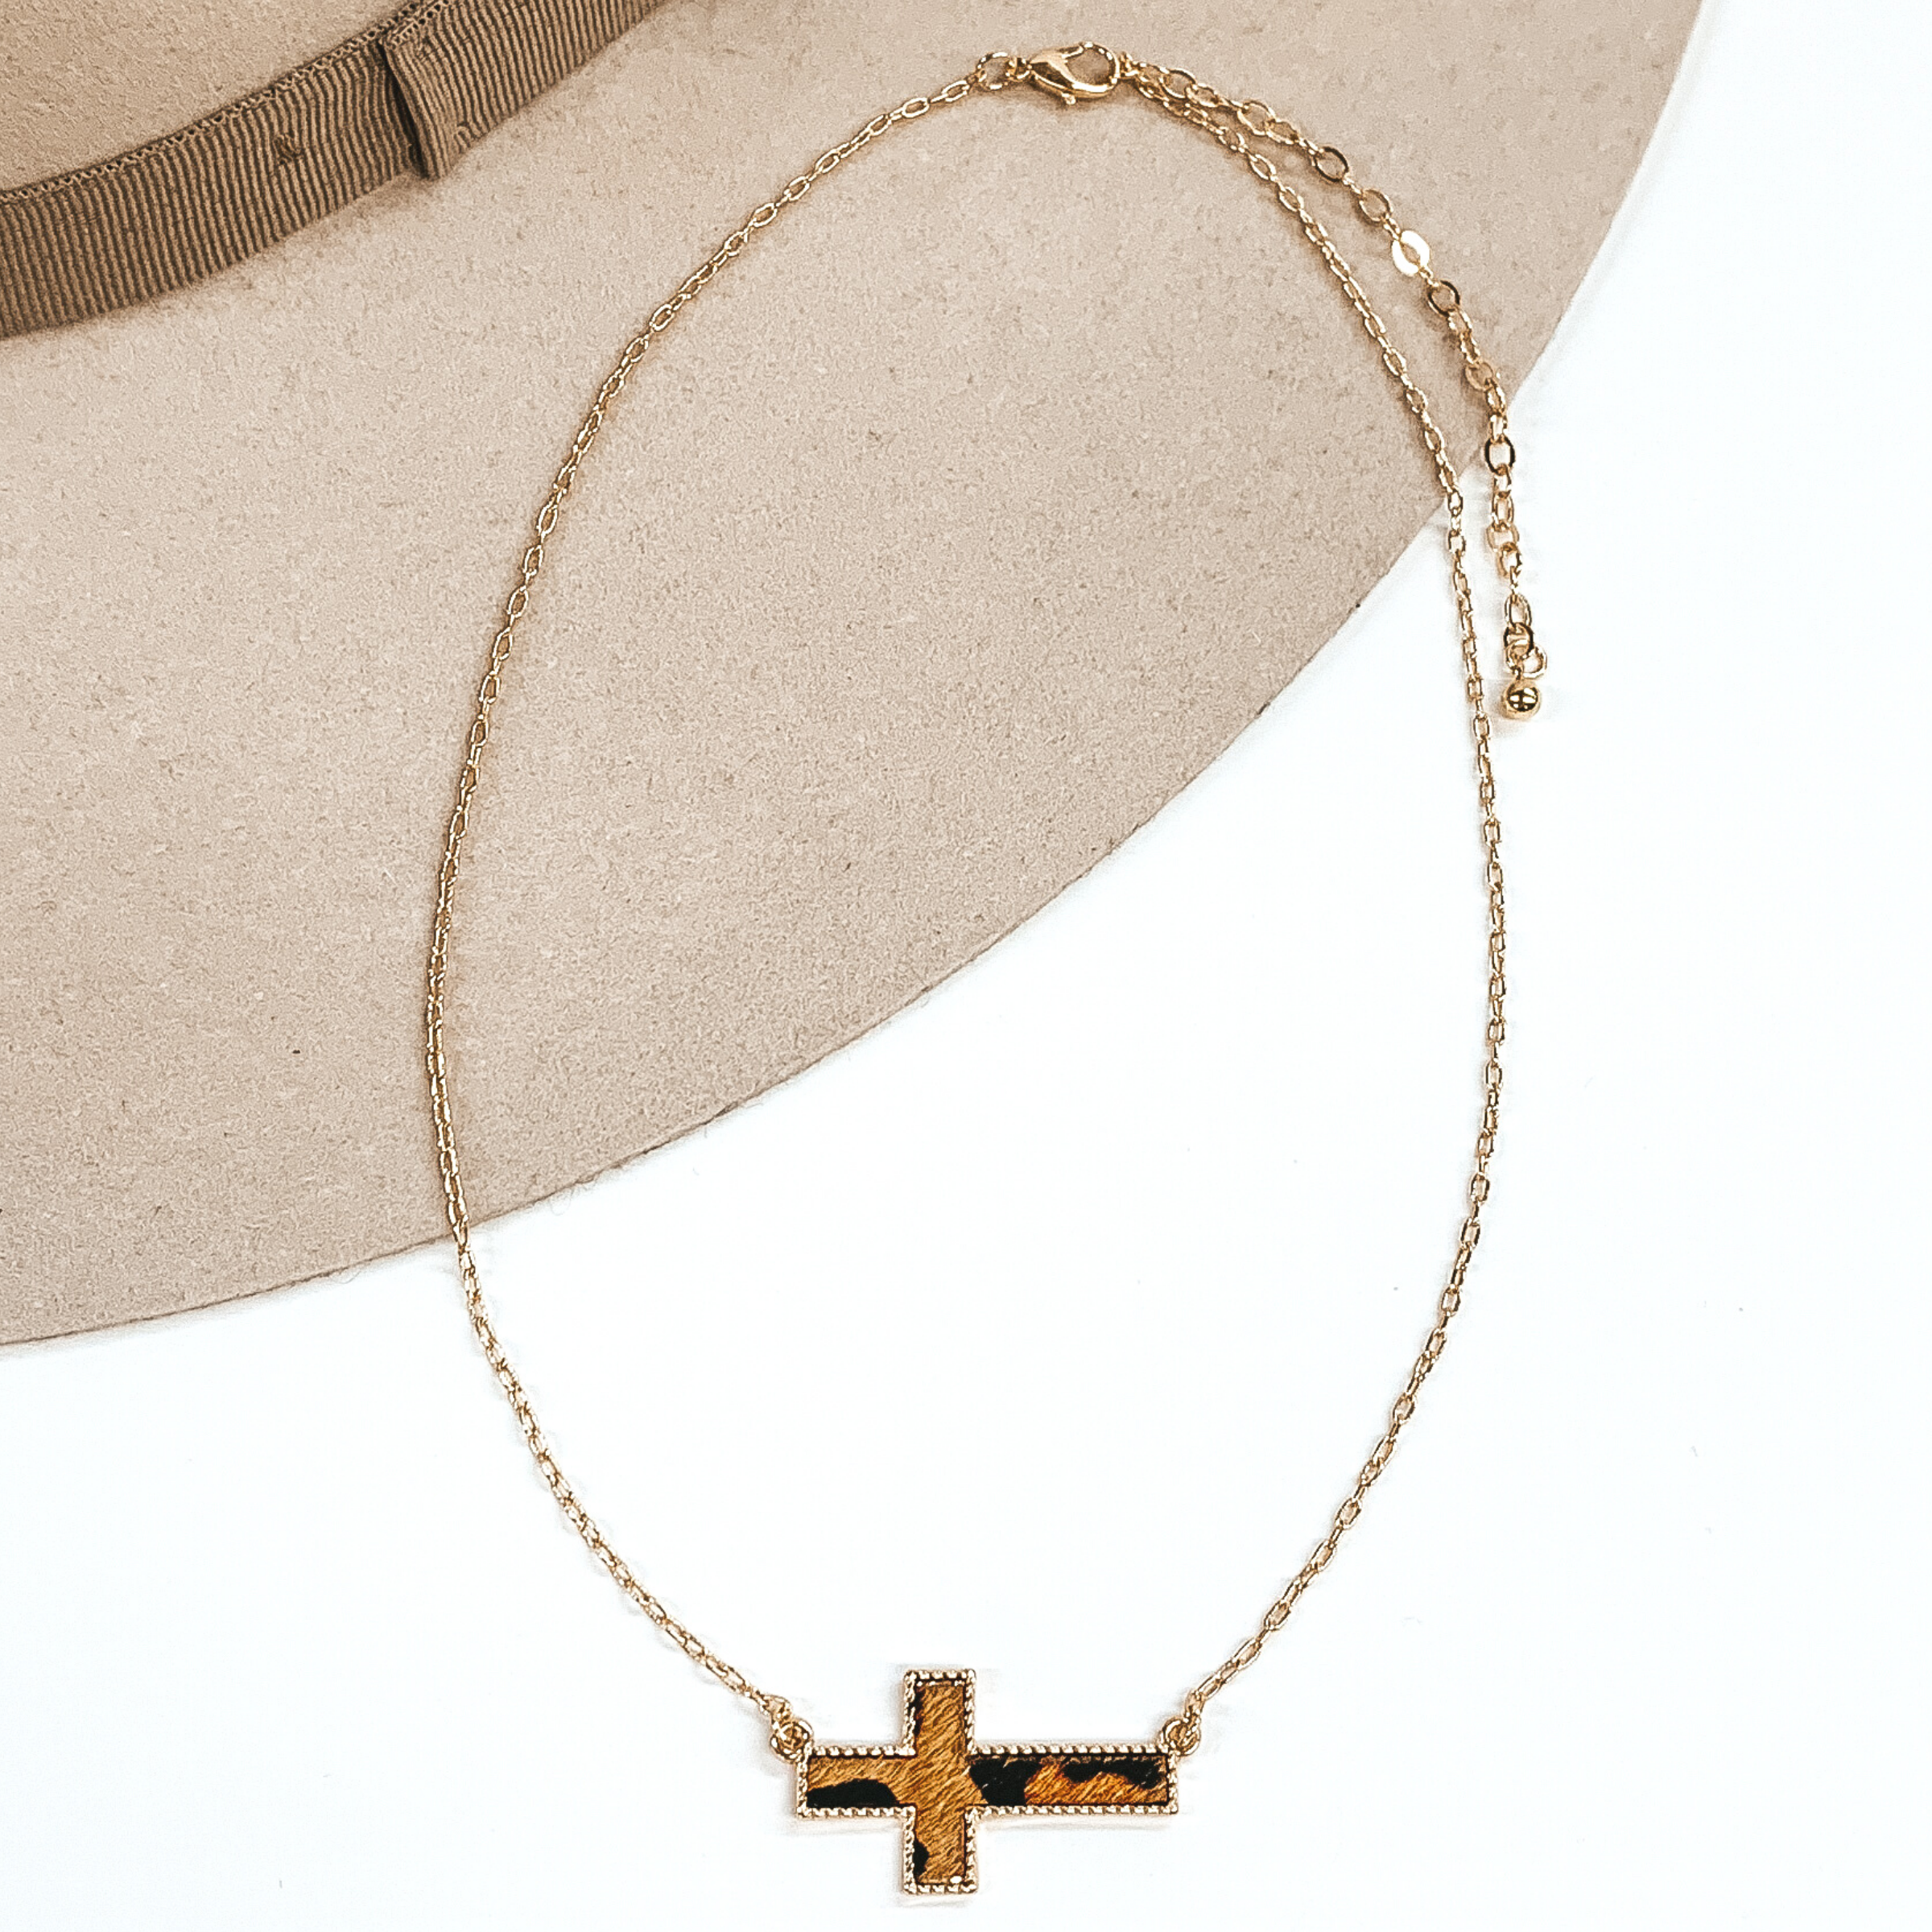 Gold paperclip chain with a cross pendant. The pendant has a brown hide inlay with an animal print. This necklace is pictured on a white and beige background.